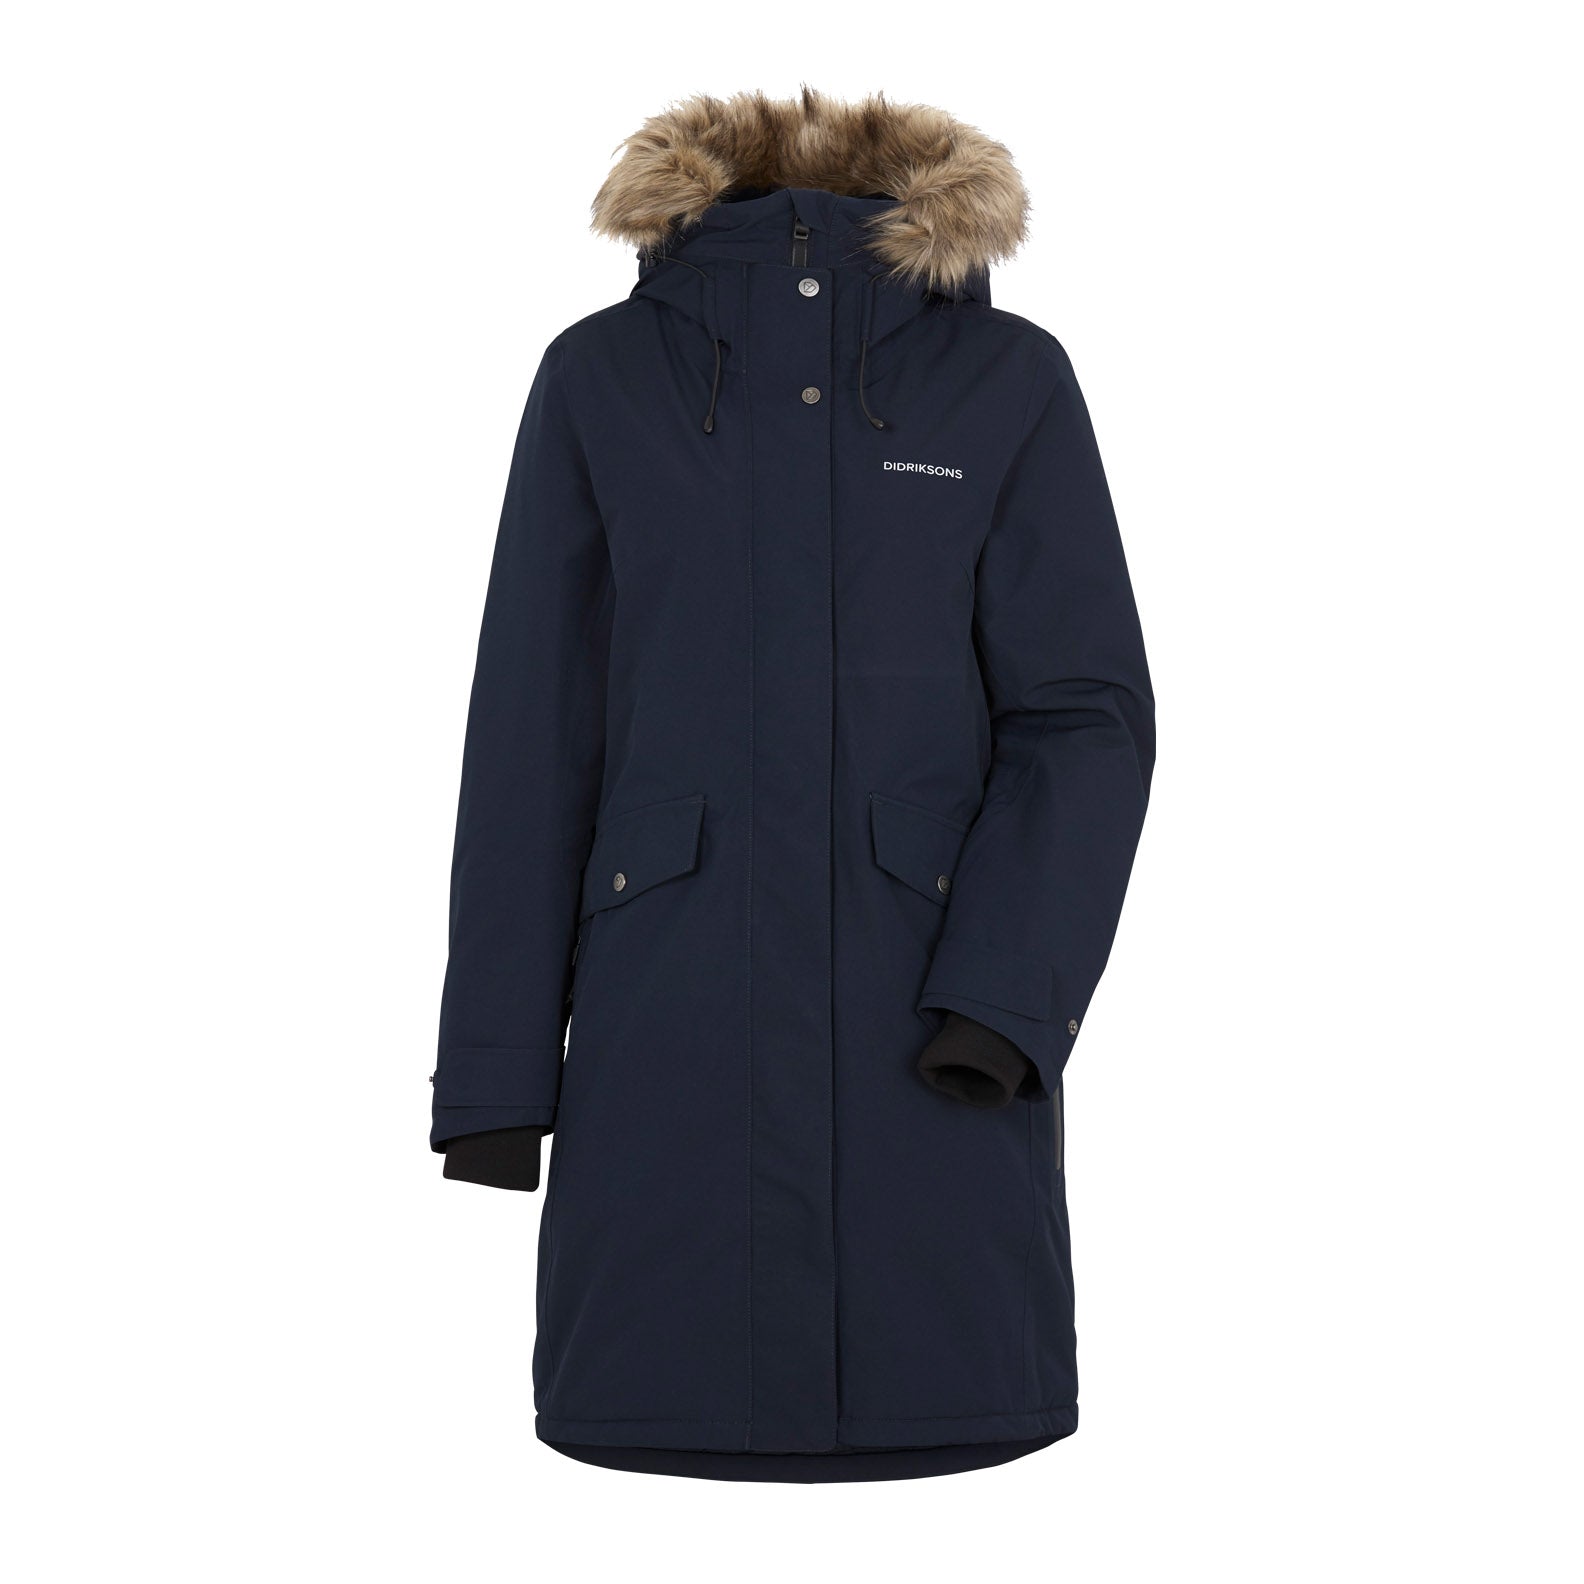 Didriksons Erika Womens Parka 3 | New Forest Clothing